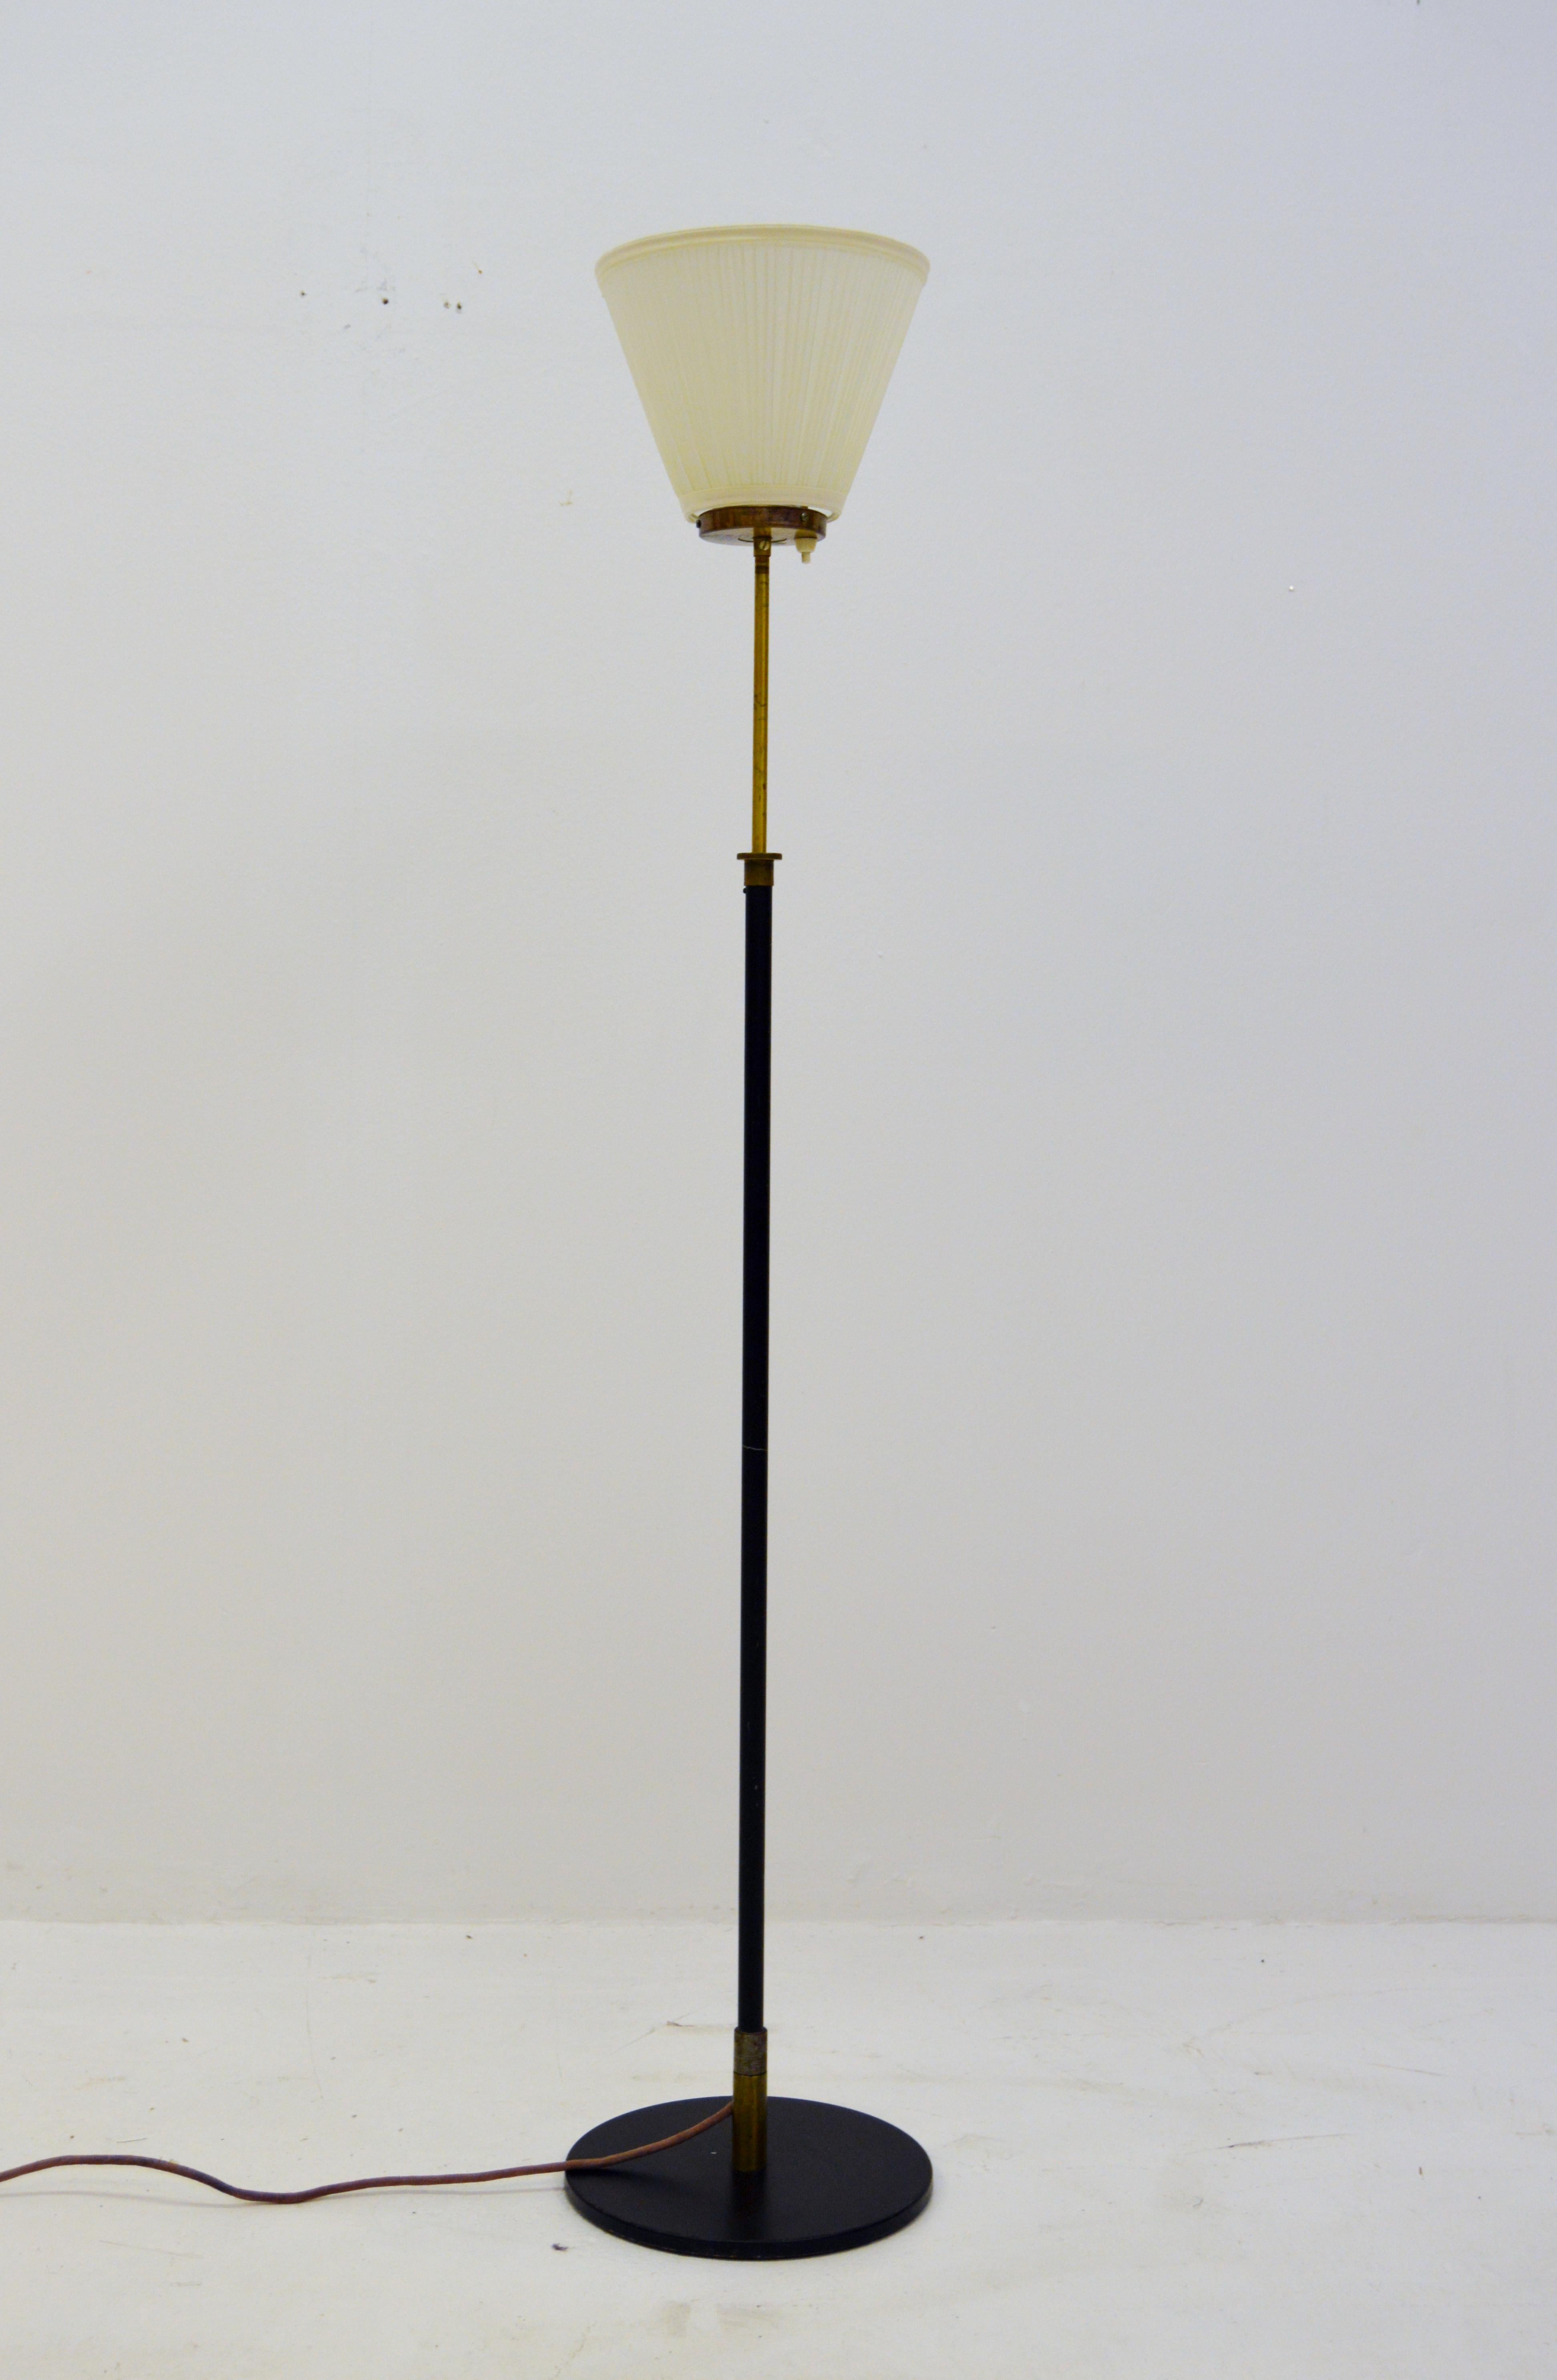 Unusual floor lamp with black metal bar and elegant brass details. Uplight with adjustable height 110 cm-160 cm circa.
Lampshade made of fabric in top, with a black metal foot and metal bar. The cord has since the photo was taken been replaced with